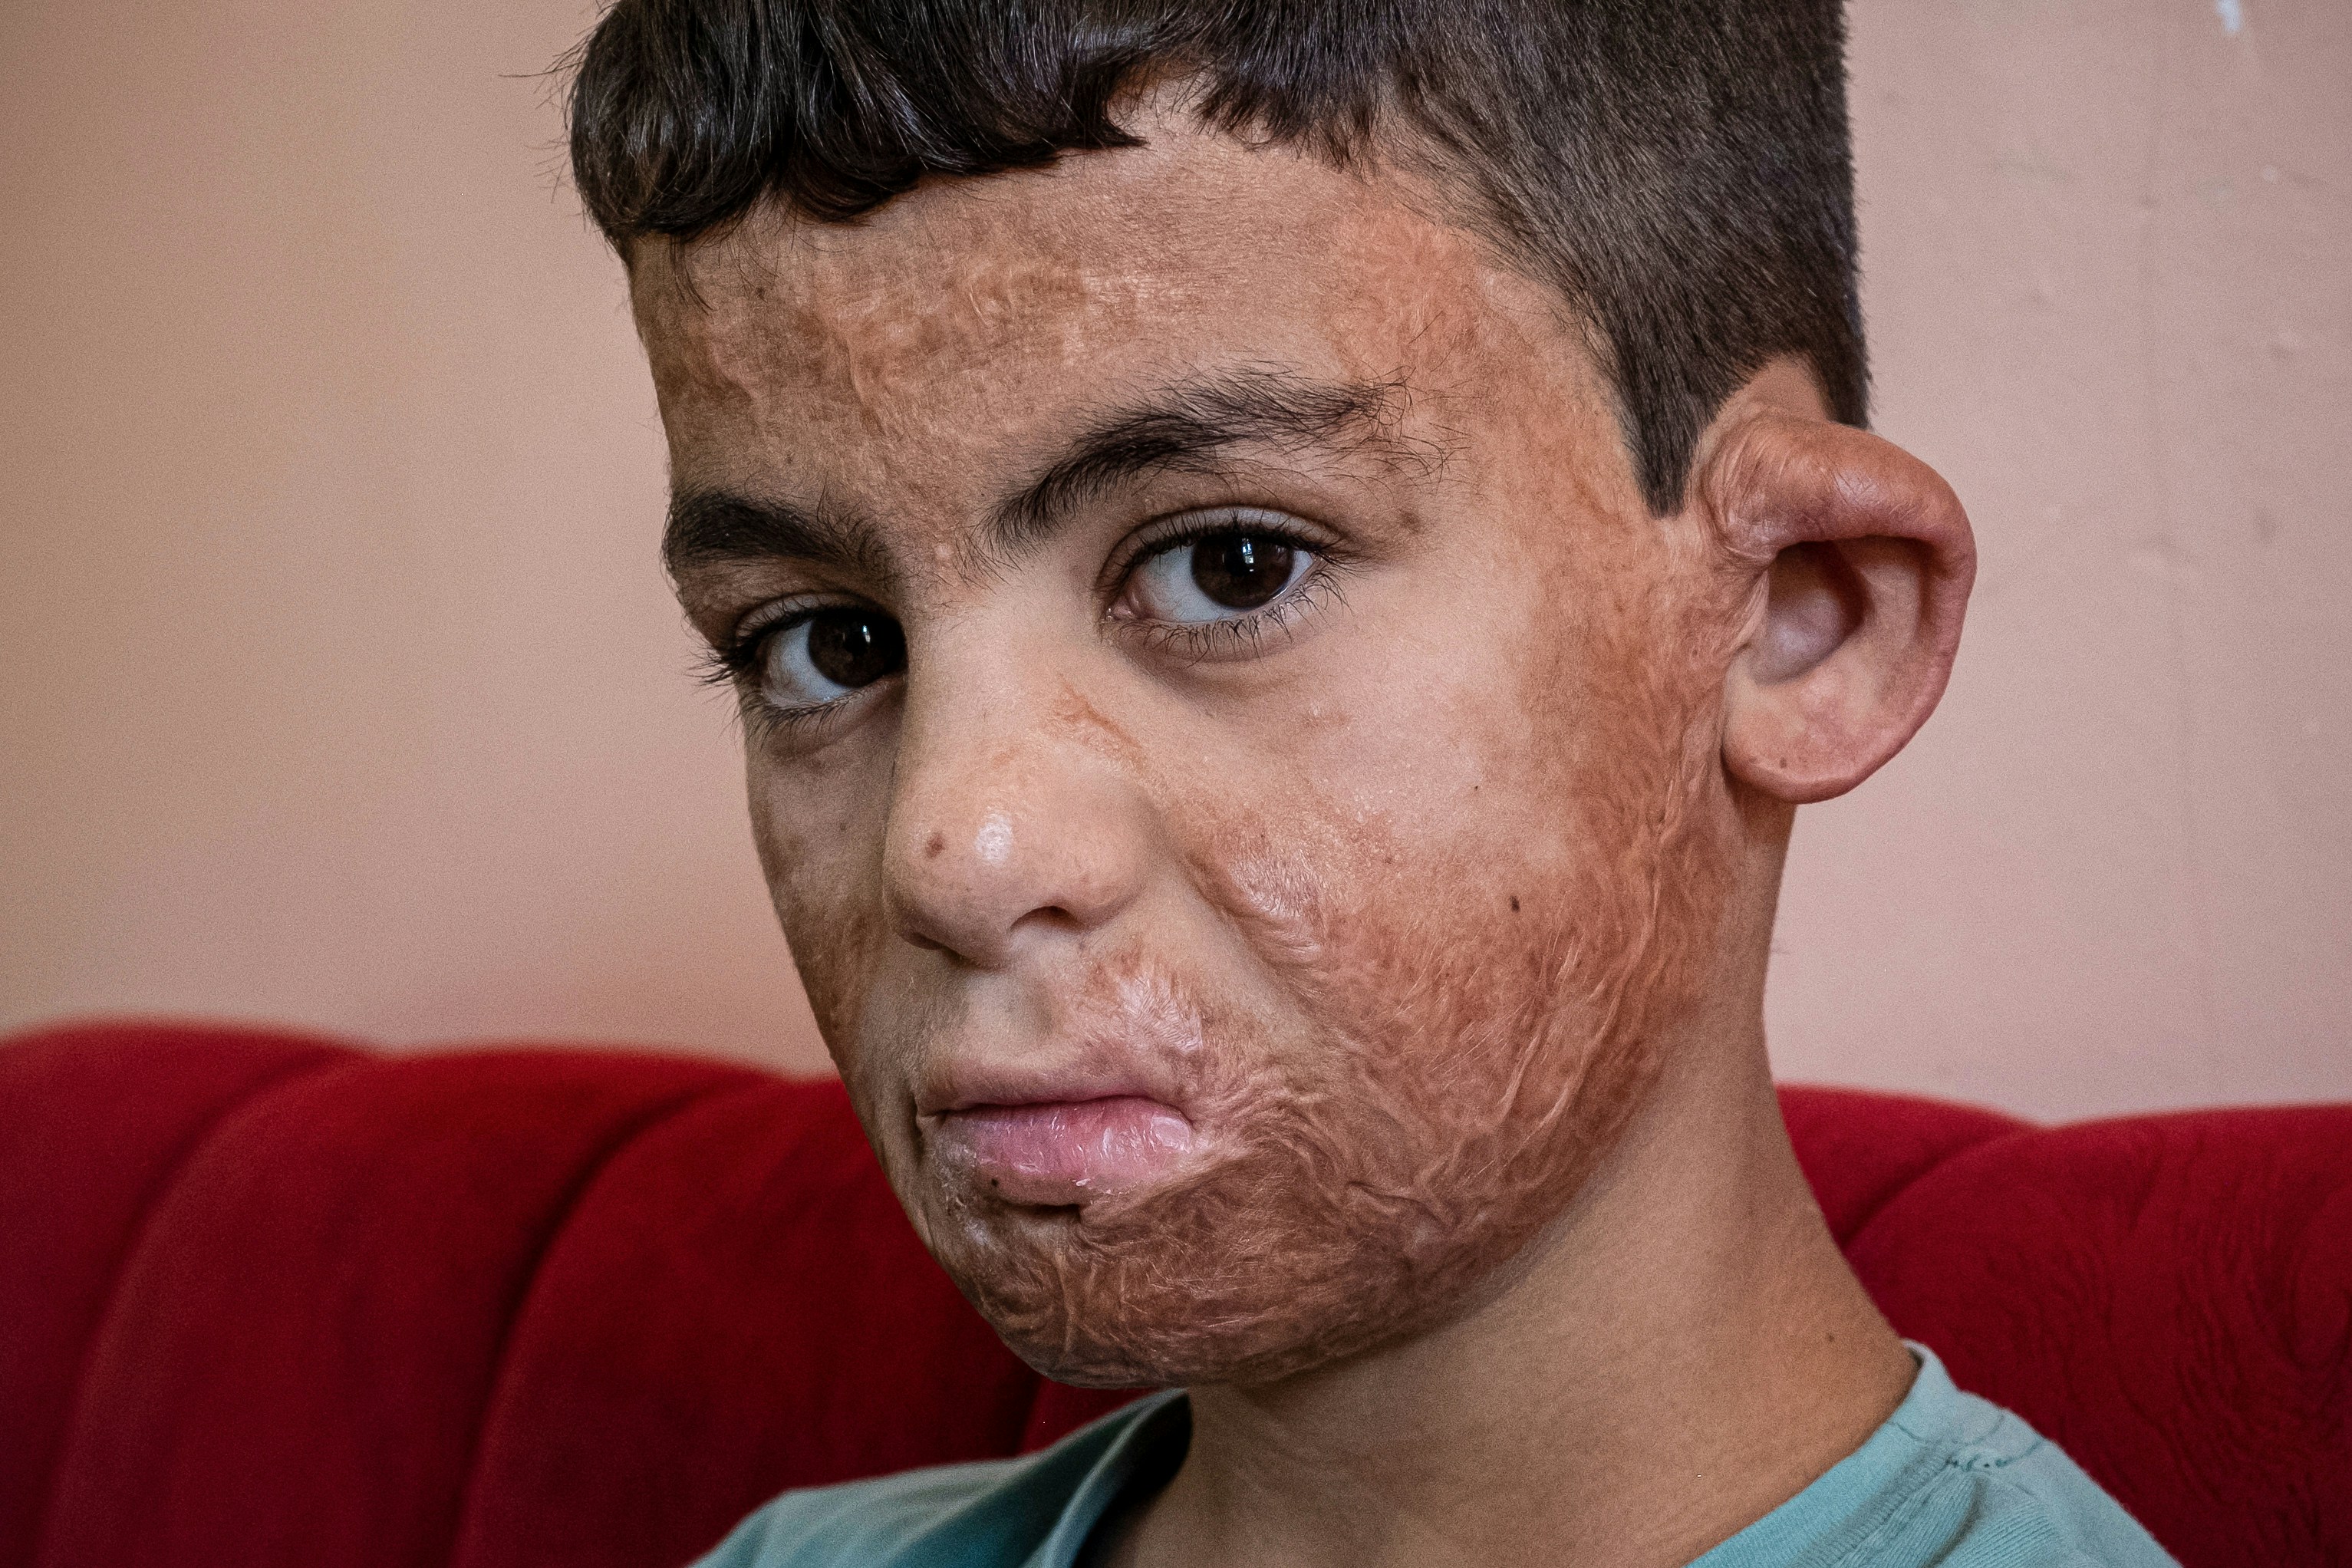 28,8,2022, Hawija, Iraq

A portrait of Omer Ahmed whose one of the victim of the Dutch airstrike during the war against ISIS. 

In June 2015, a bomb dropped by a Dutch F-16 jet hit a car bomb factory in the town of Hawija near Kirkuk, killing at least 70 civilians. It took the Netherlands four years to admit its involvement in the tragic incident.
Photo: Hawre Khalid for The Intercept